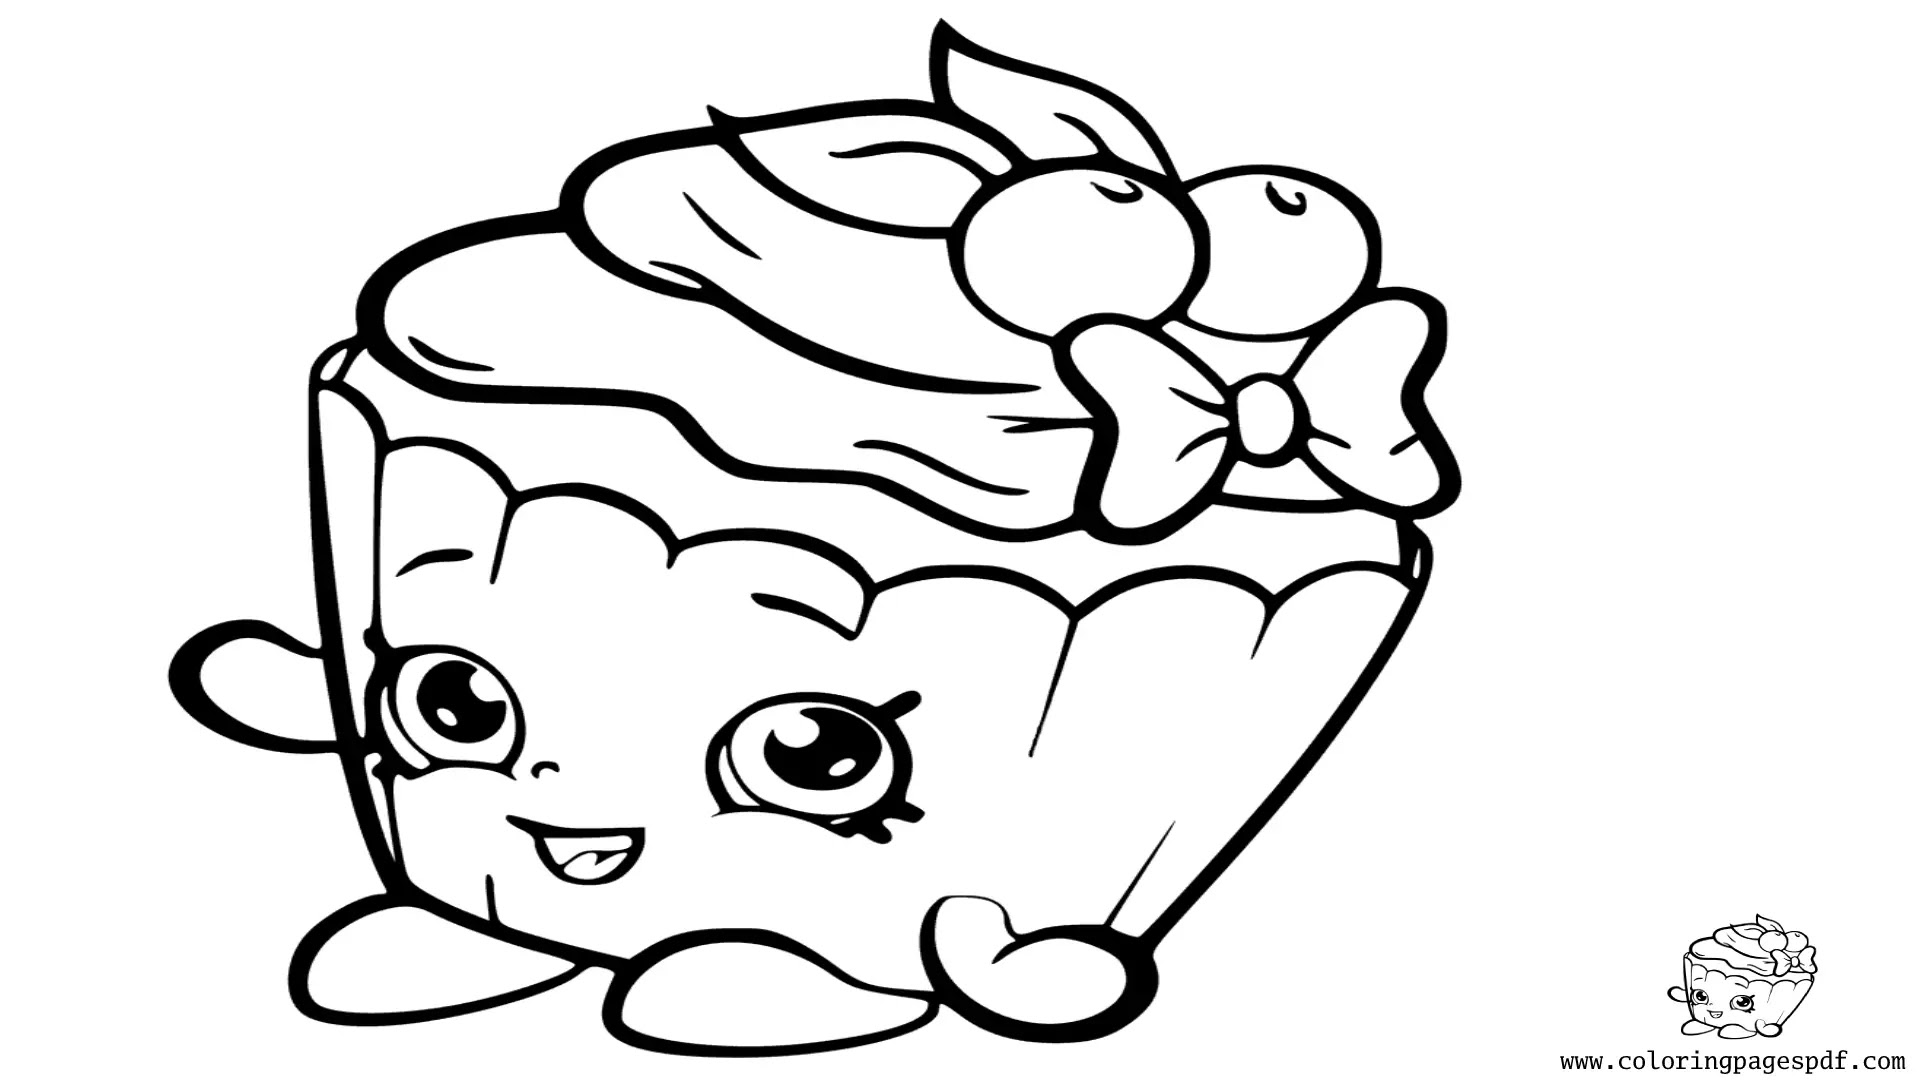 Coloring Page Of Cherry Cake